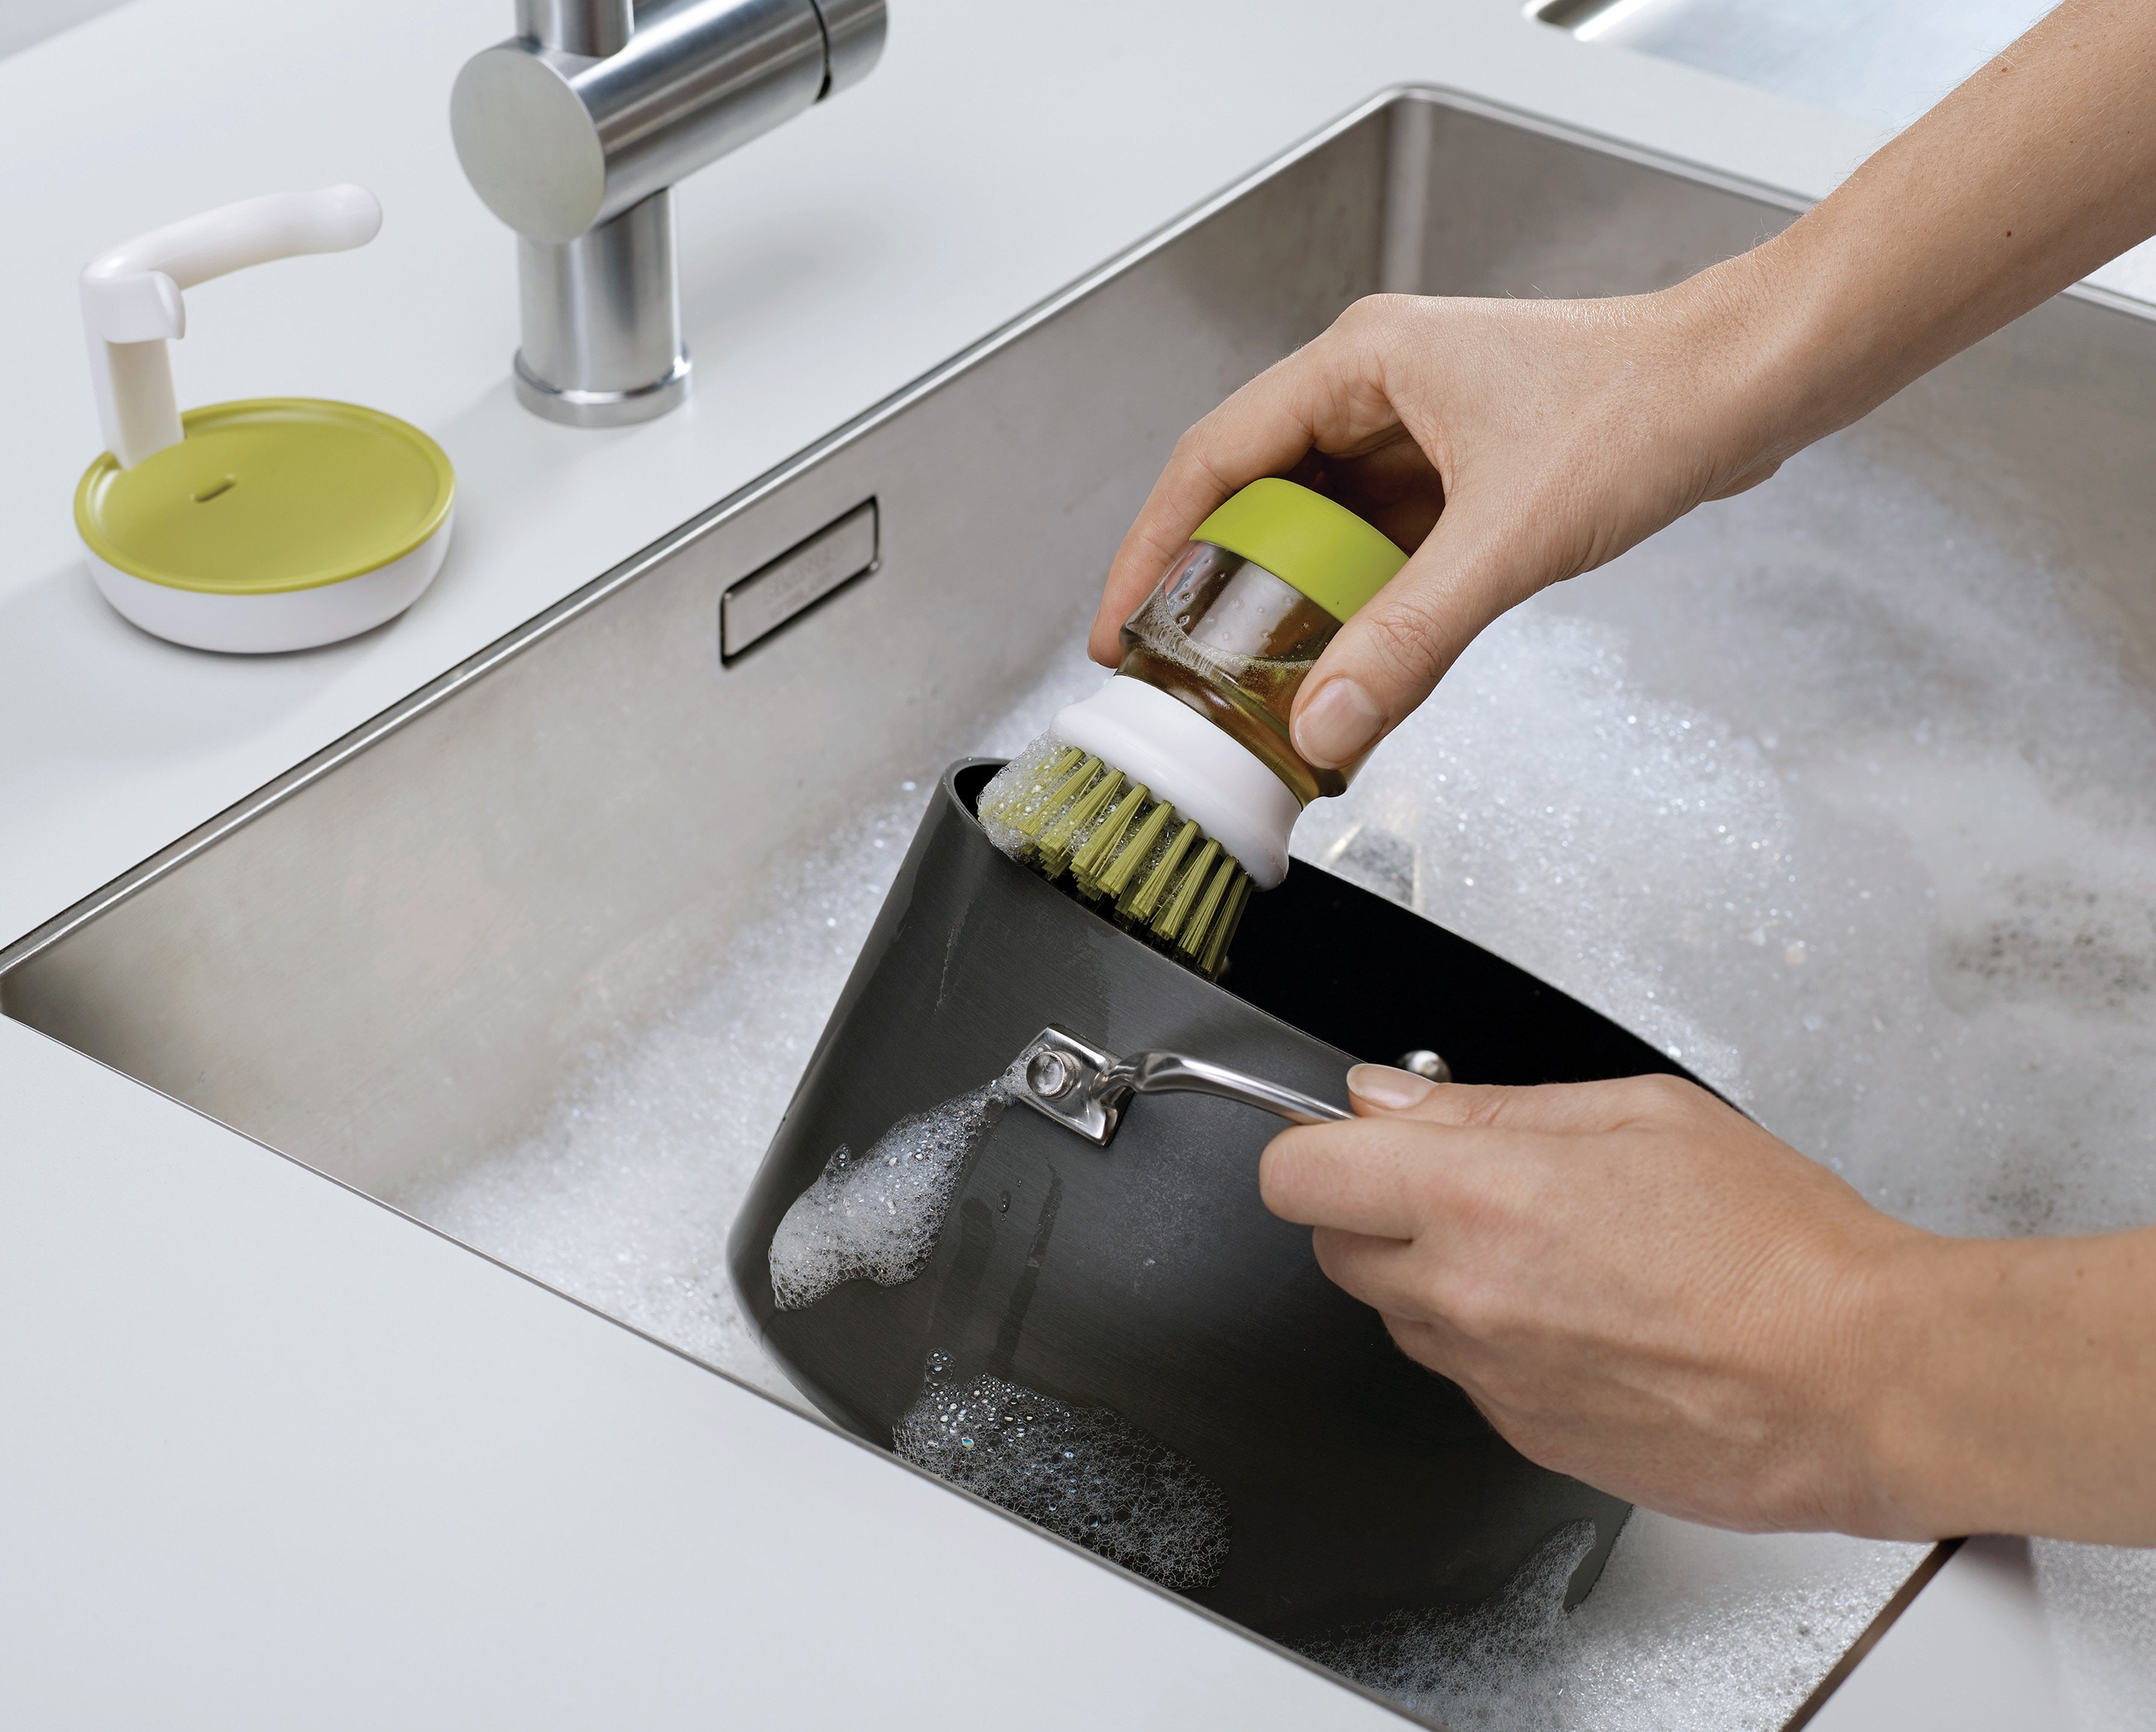 BEON.COM.AU  This sturdy hand-held washing-up brush features an easy-fill reservoir that dispenses the required amount of soap with a simple push of the top button.  Compact scrubbing brush with non-scratch bristles ideal for pots, pans and dishes Integrated, easy-to-fill reservoir for washing up liquid Simp... Joseph Joseph at BEON.COM.AU